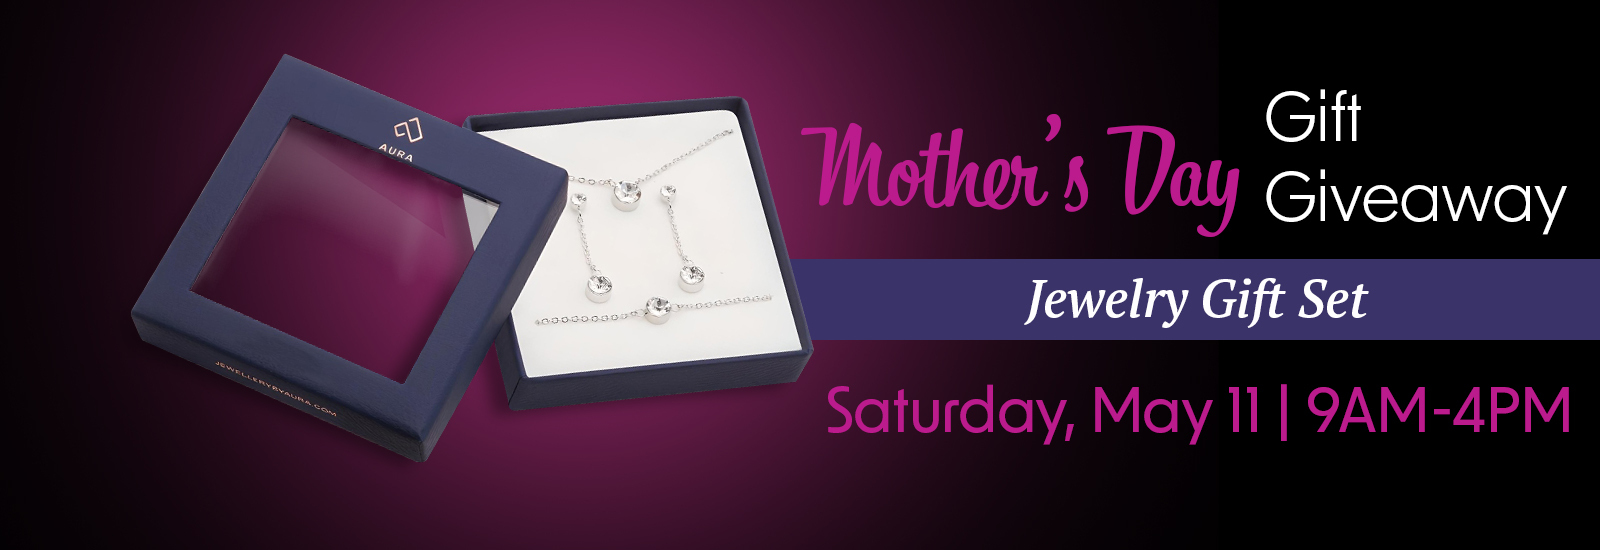 Mother's Day Gift Giveaway